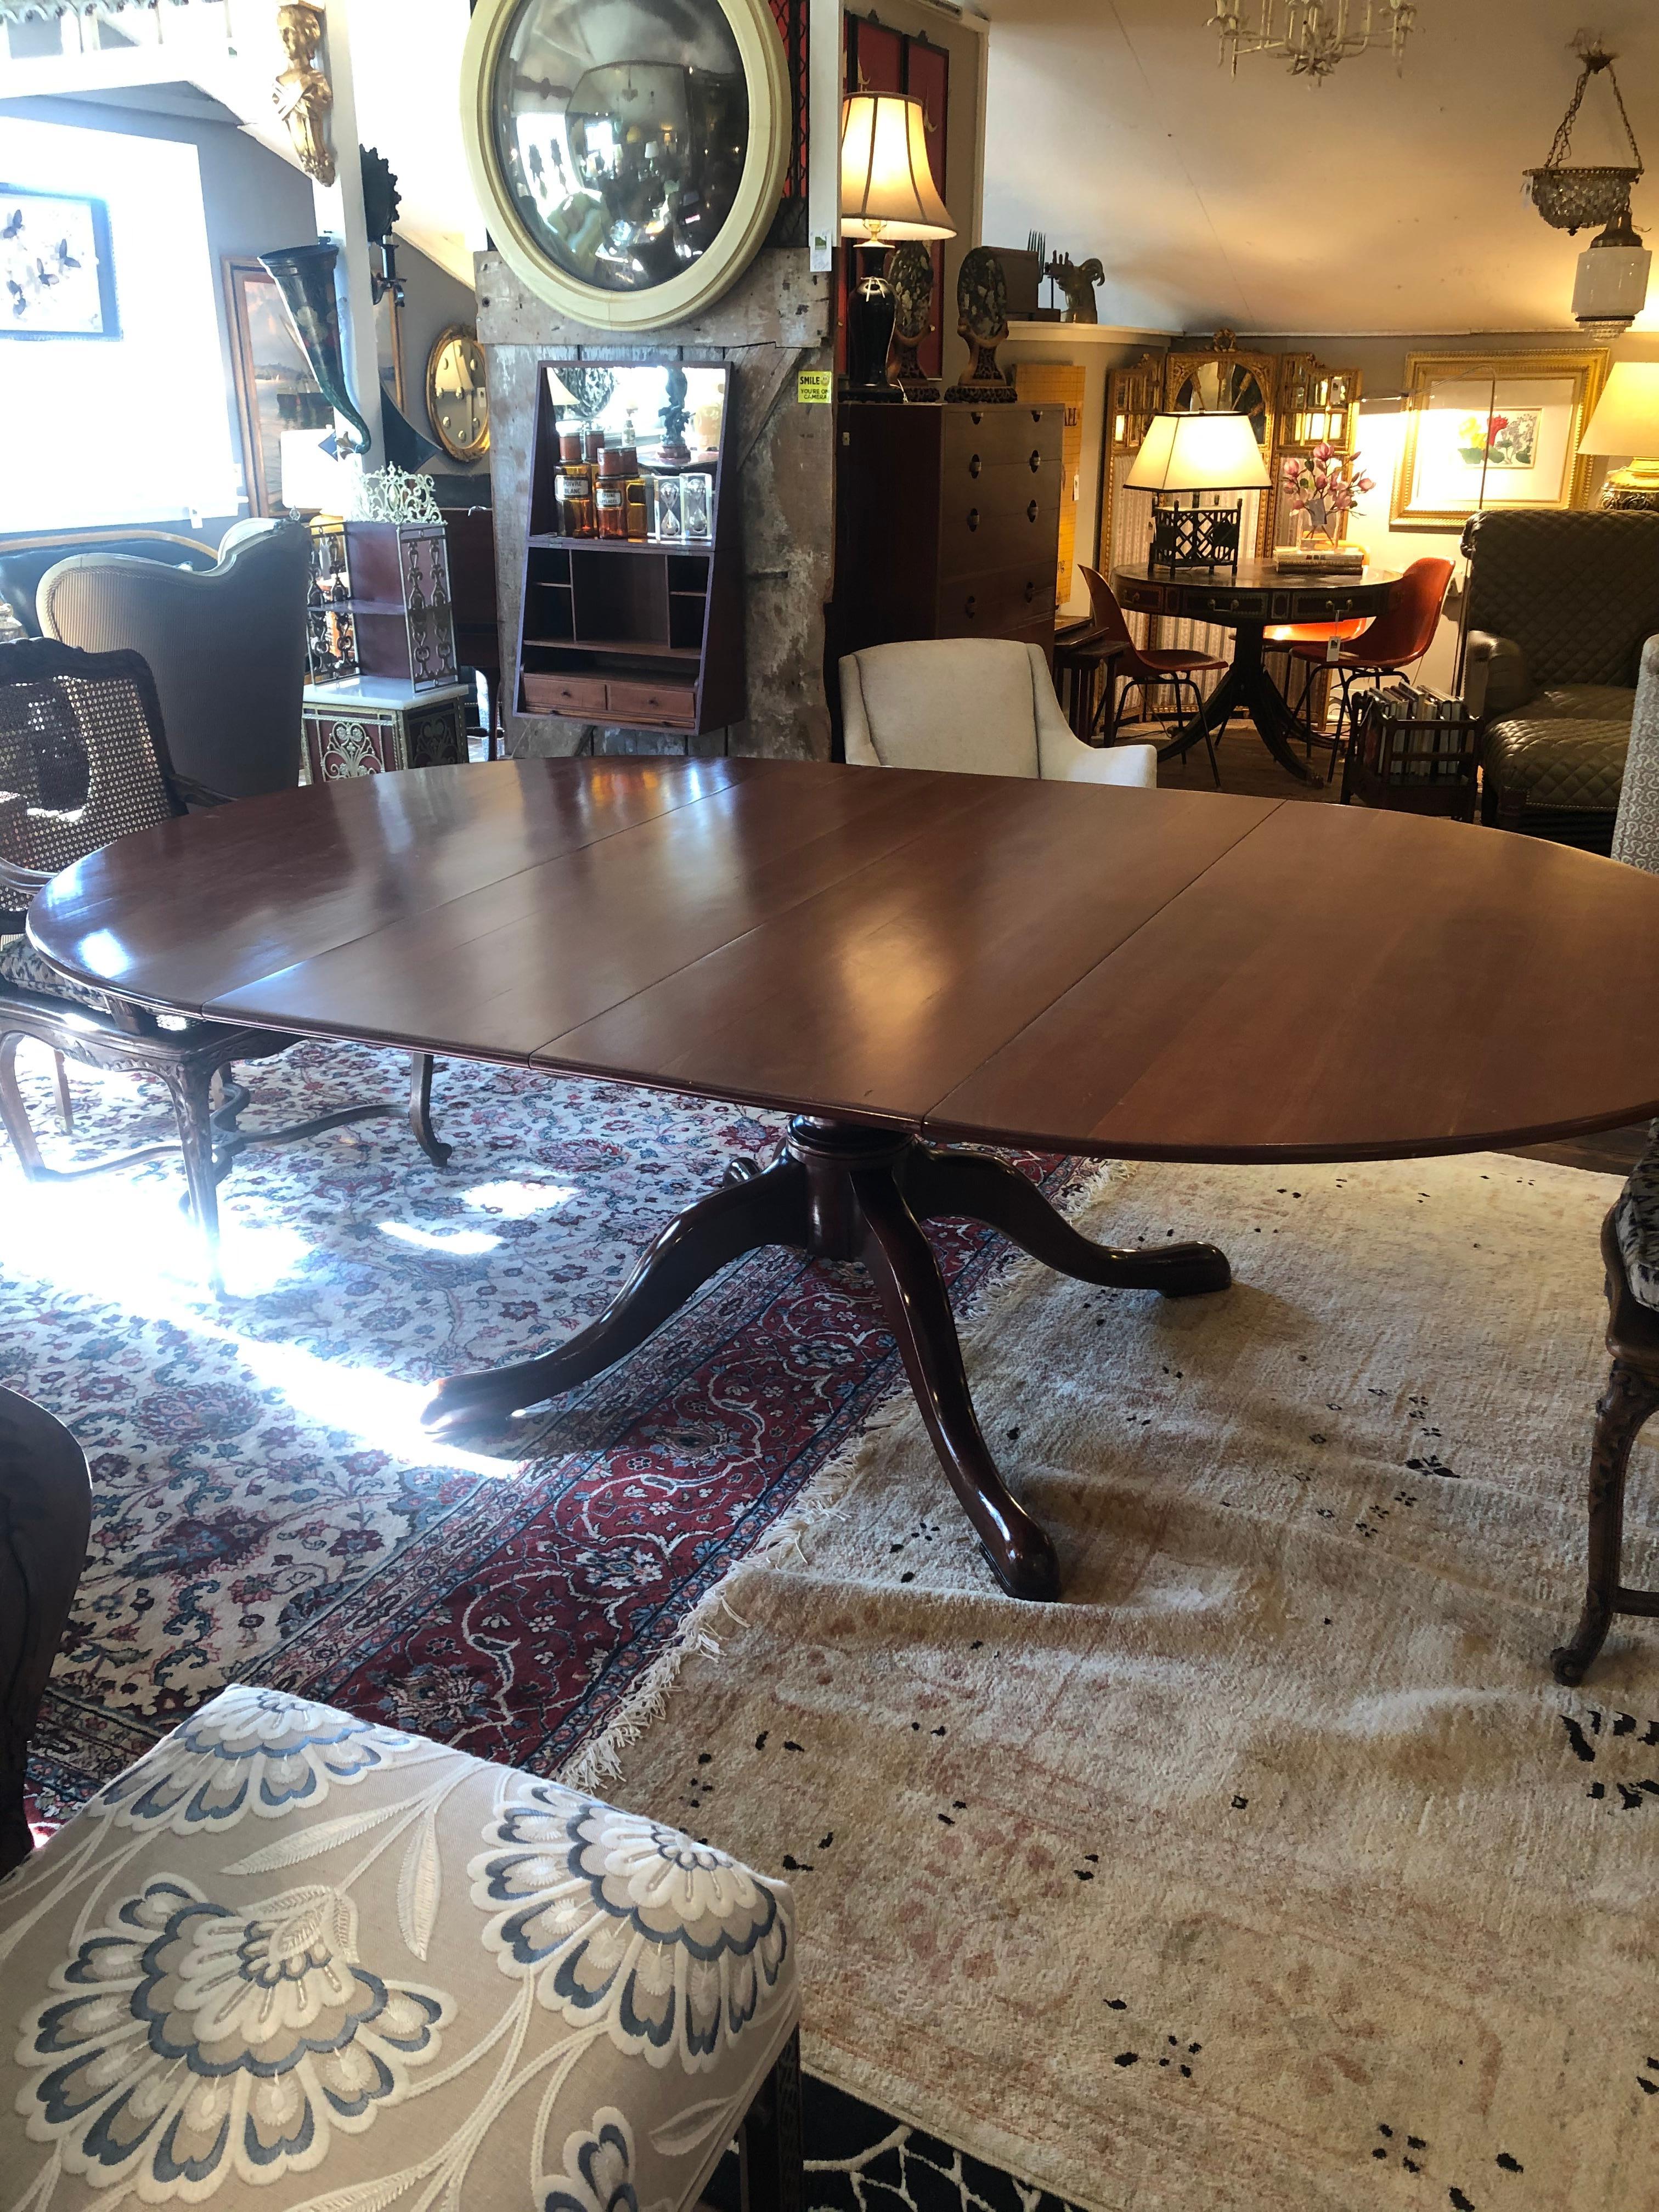 Classic Traditional Round Cherry Dining Table Extending to Large Oval 4